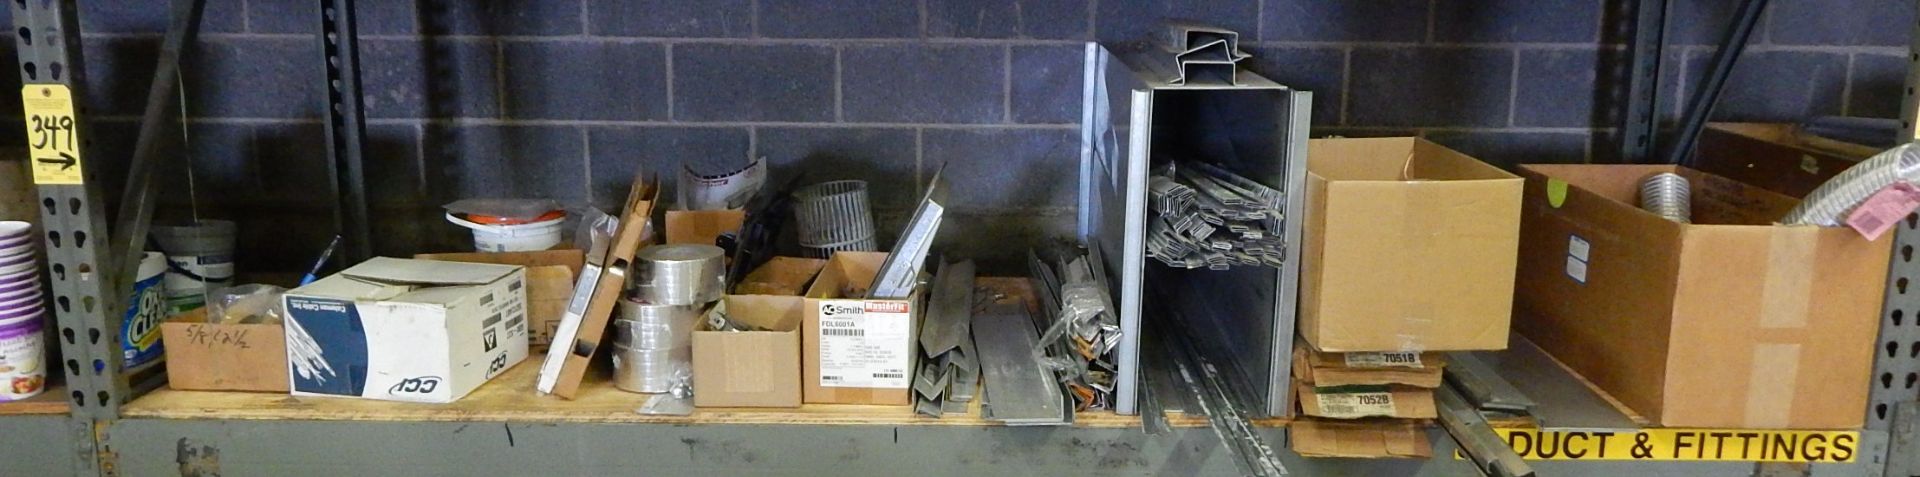 Contents of Shelf of Pallet Shelving